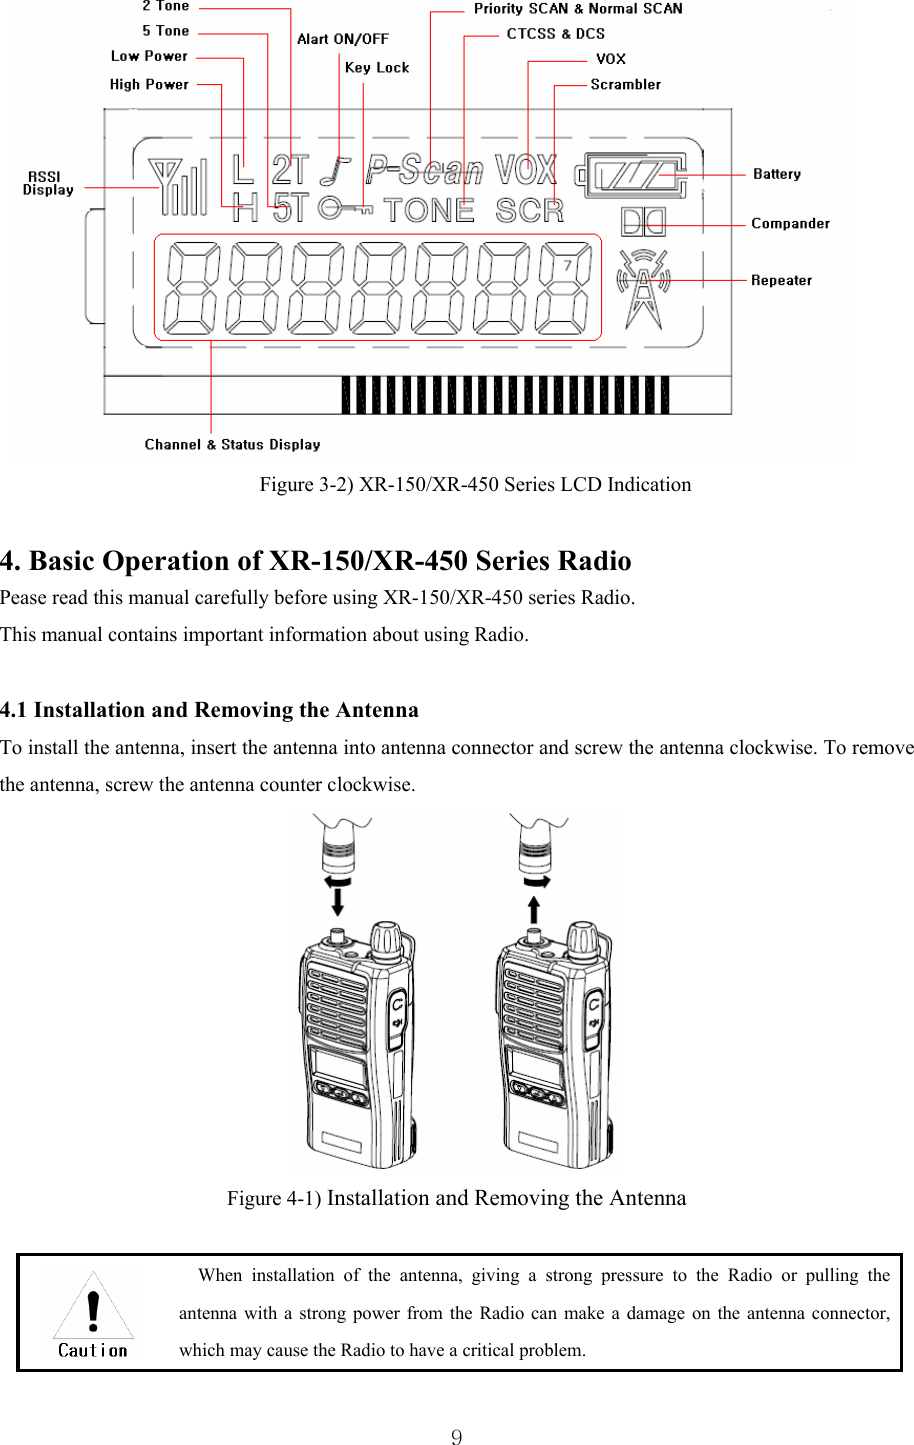  9 Figure 3-2) XR-150/XR-450 Series LCD Indication  4. Basic Operation of XR-150/XR-450 Series Radio Pease read this manual carefully before using XR-150/XR-450 series Radio. This manual contains important information about using Radio.  4.1 Installation and Removing the Antenna  To install the antenna, insert the antenna into antenna connector and screw the antenna clockwise. To remove the antenna, screw the antenna counter clockwise.  Figure 4-1) Installation and Removing the Antenna   When installation of the antenna, giving a strong pressure to the Radio or pulling the antenna with a strong power from the Radio can make a damage on the antenna connector, which may cause the Radio to have a critical problem.    